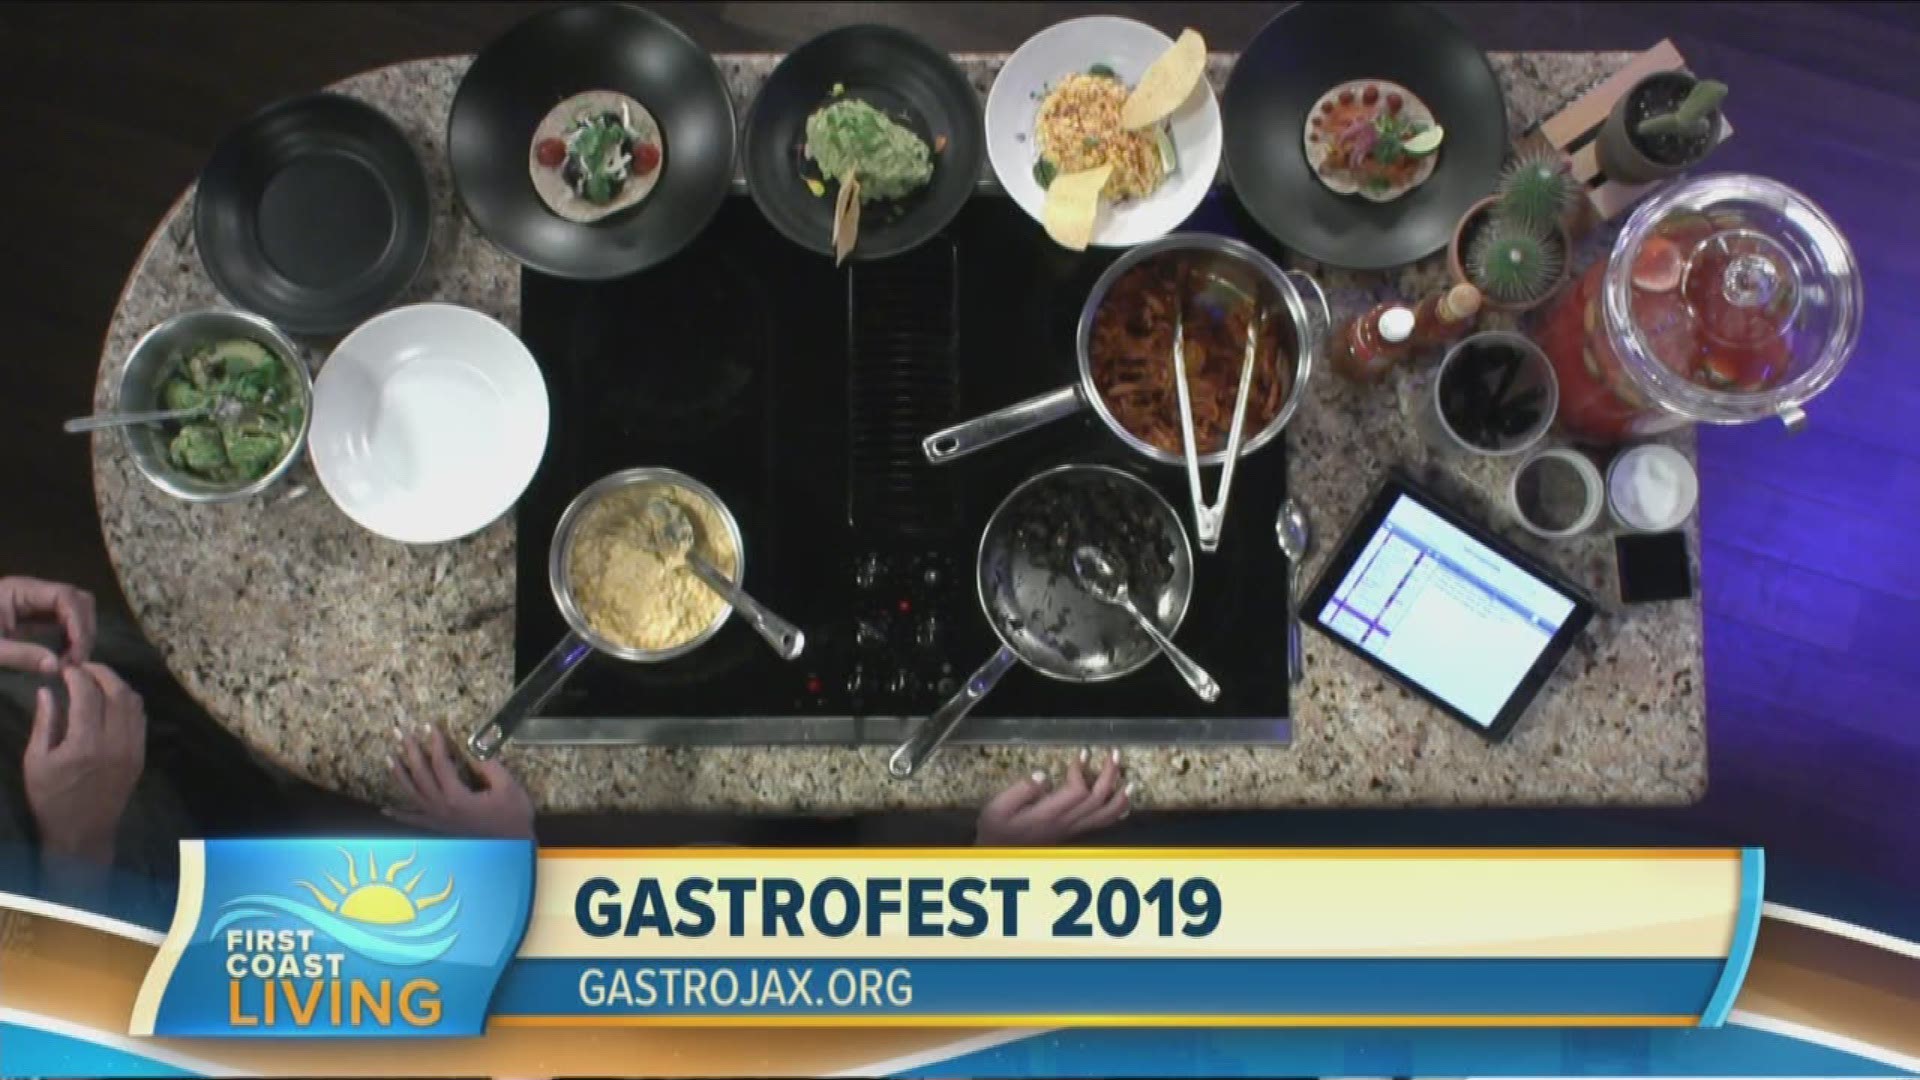 There's something for everyone at this year's Gastro Fest.